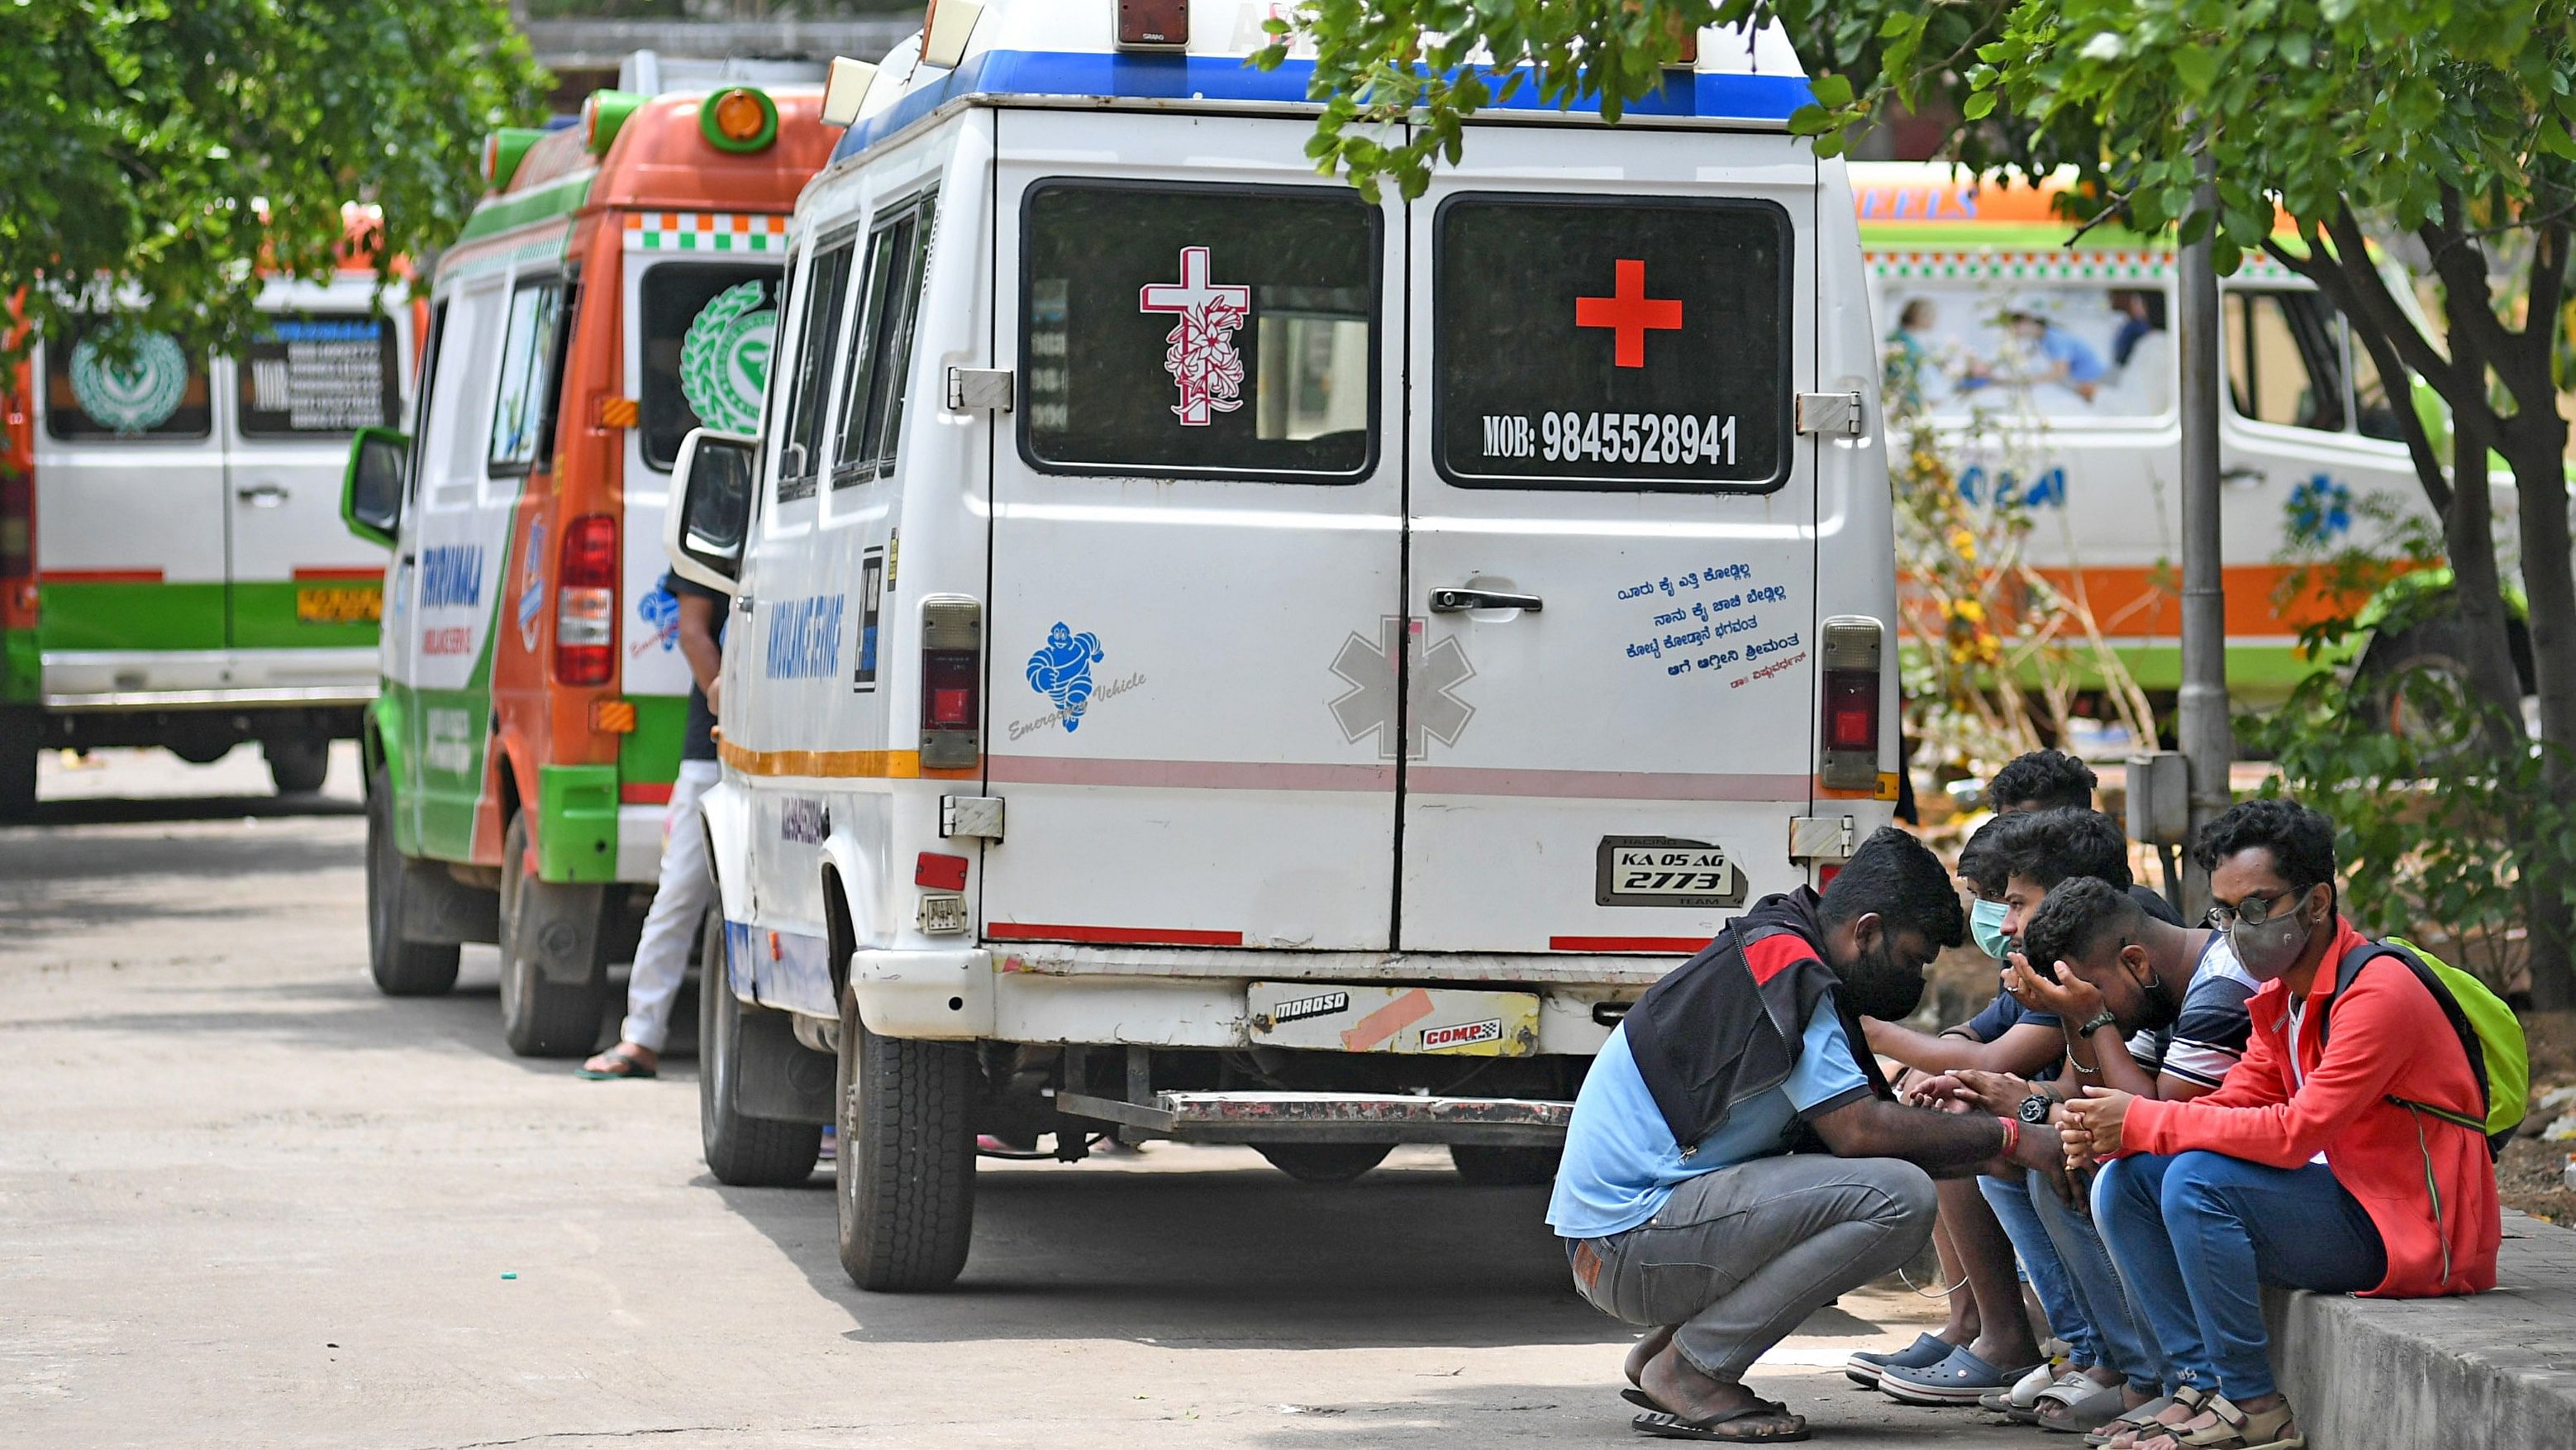 Family and friends grieve the passing of their beloved due to Covid-19 as they wait amid the several ambulances to perform the last rites at Sumanahalli Crematorium in Bengaluru. Credit: DH Photo/ Pushkar V